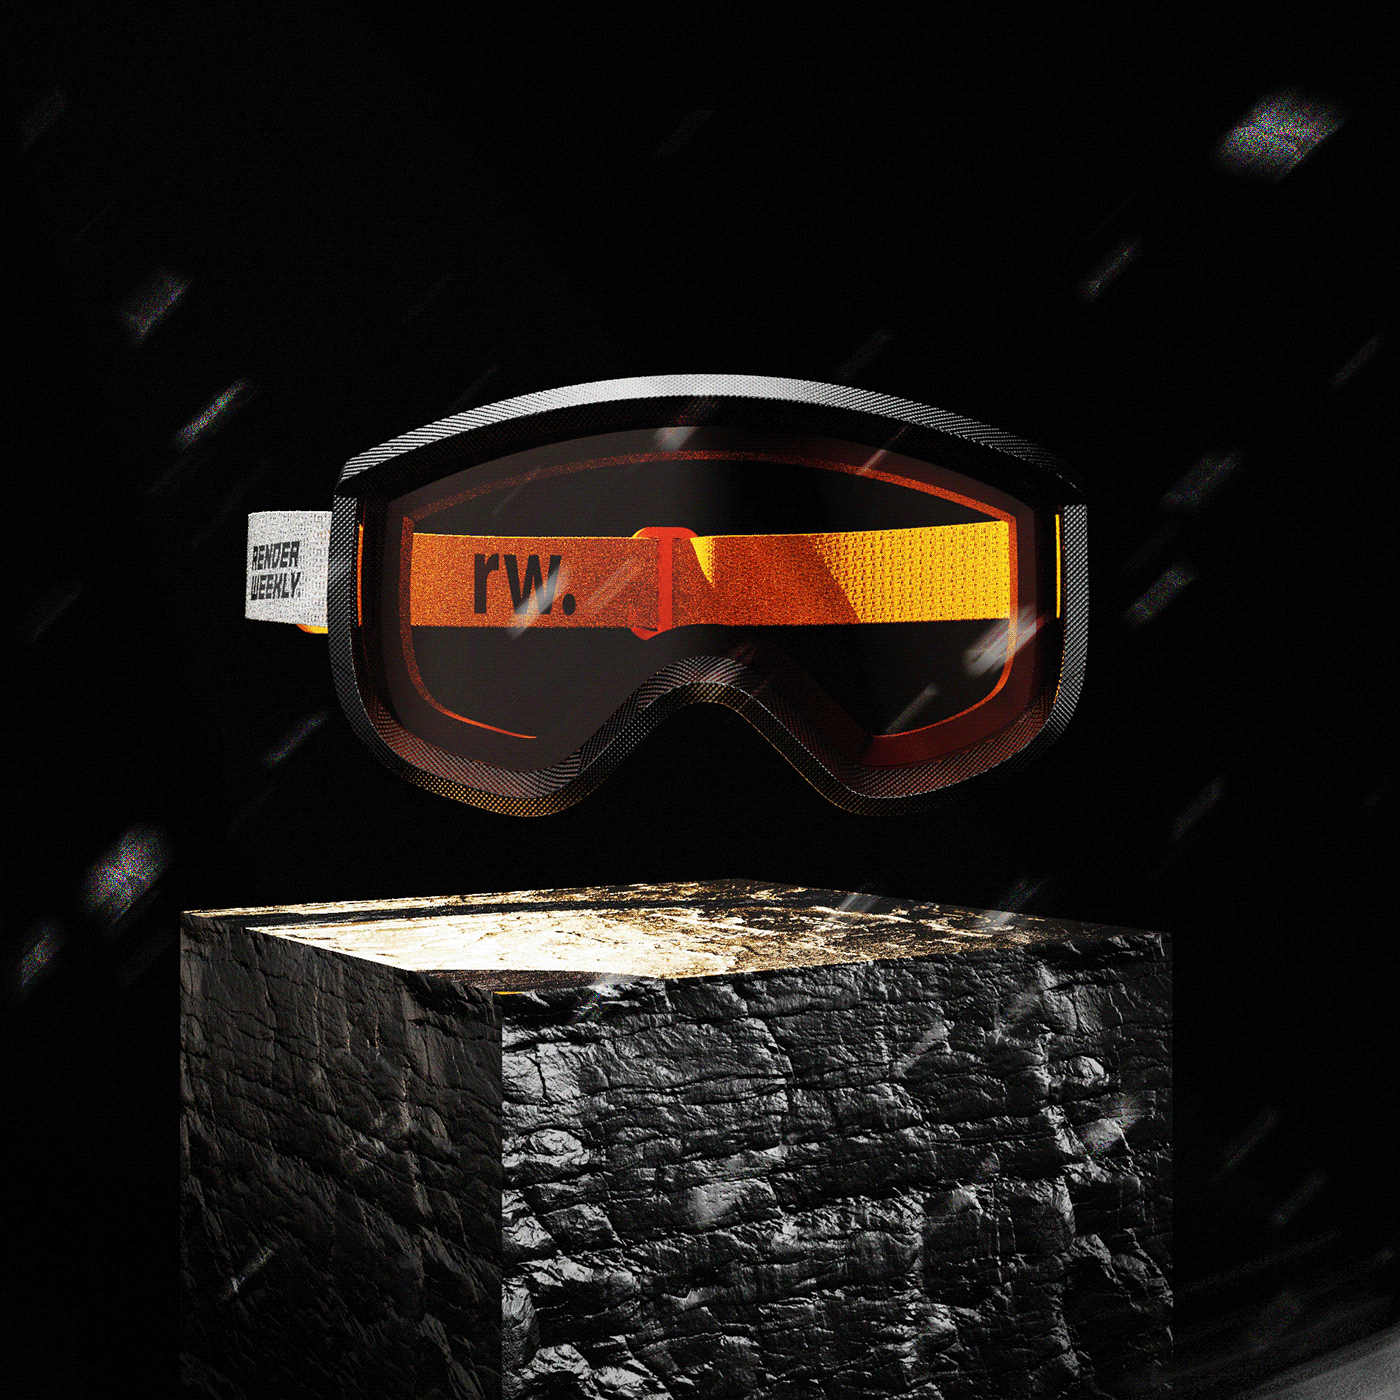 challenge design FYP goggles design product Render Renderweekly topical Viral